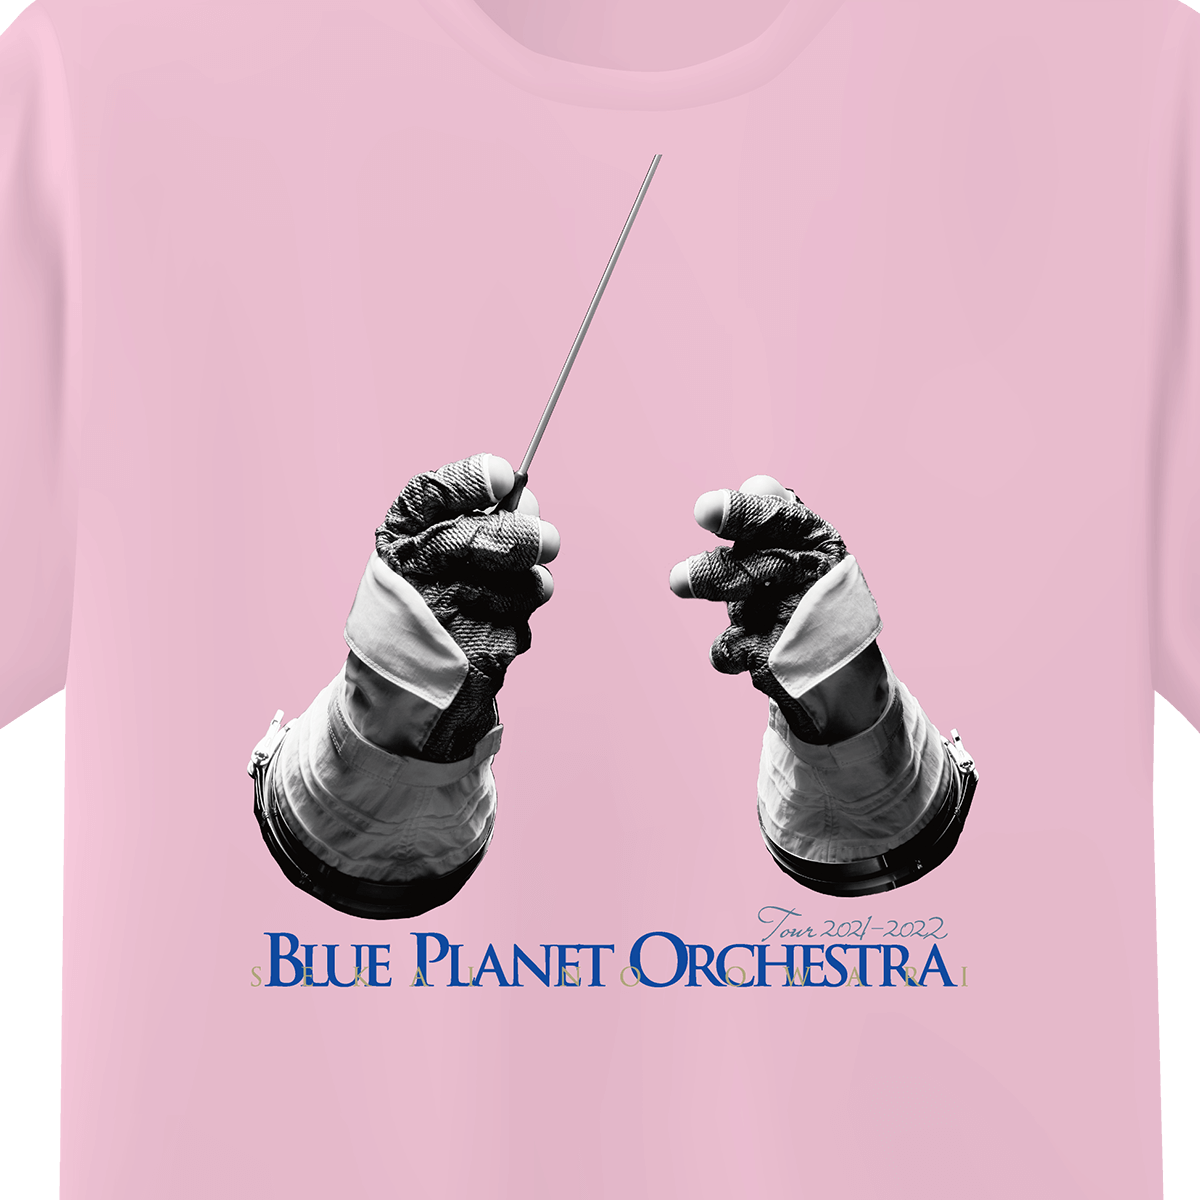 BLUE PLANET ORCHESTRA ツアー キッズシャツ(ピンク)